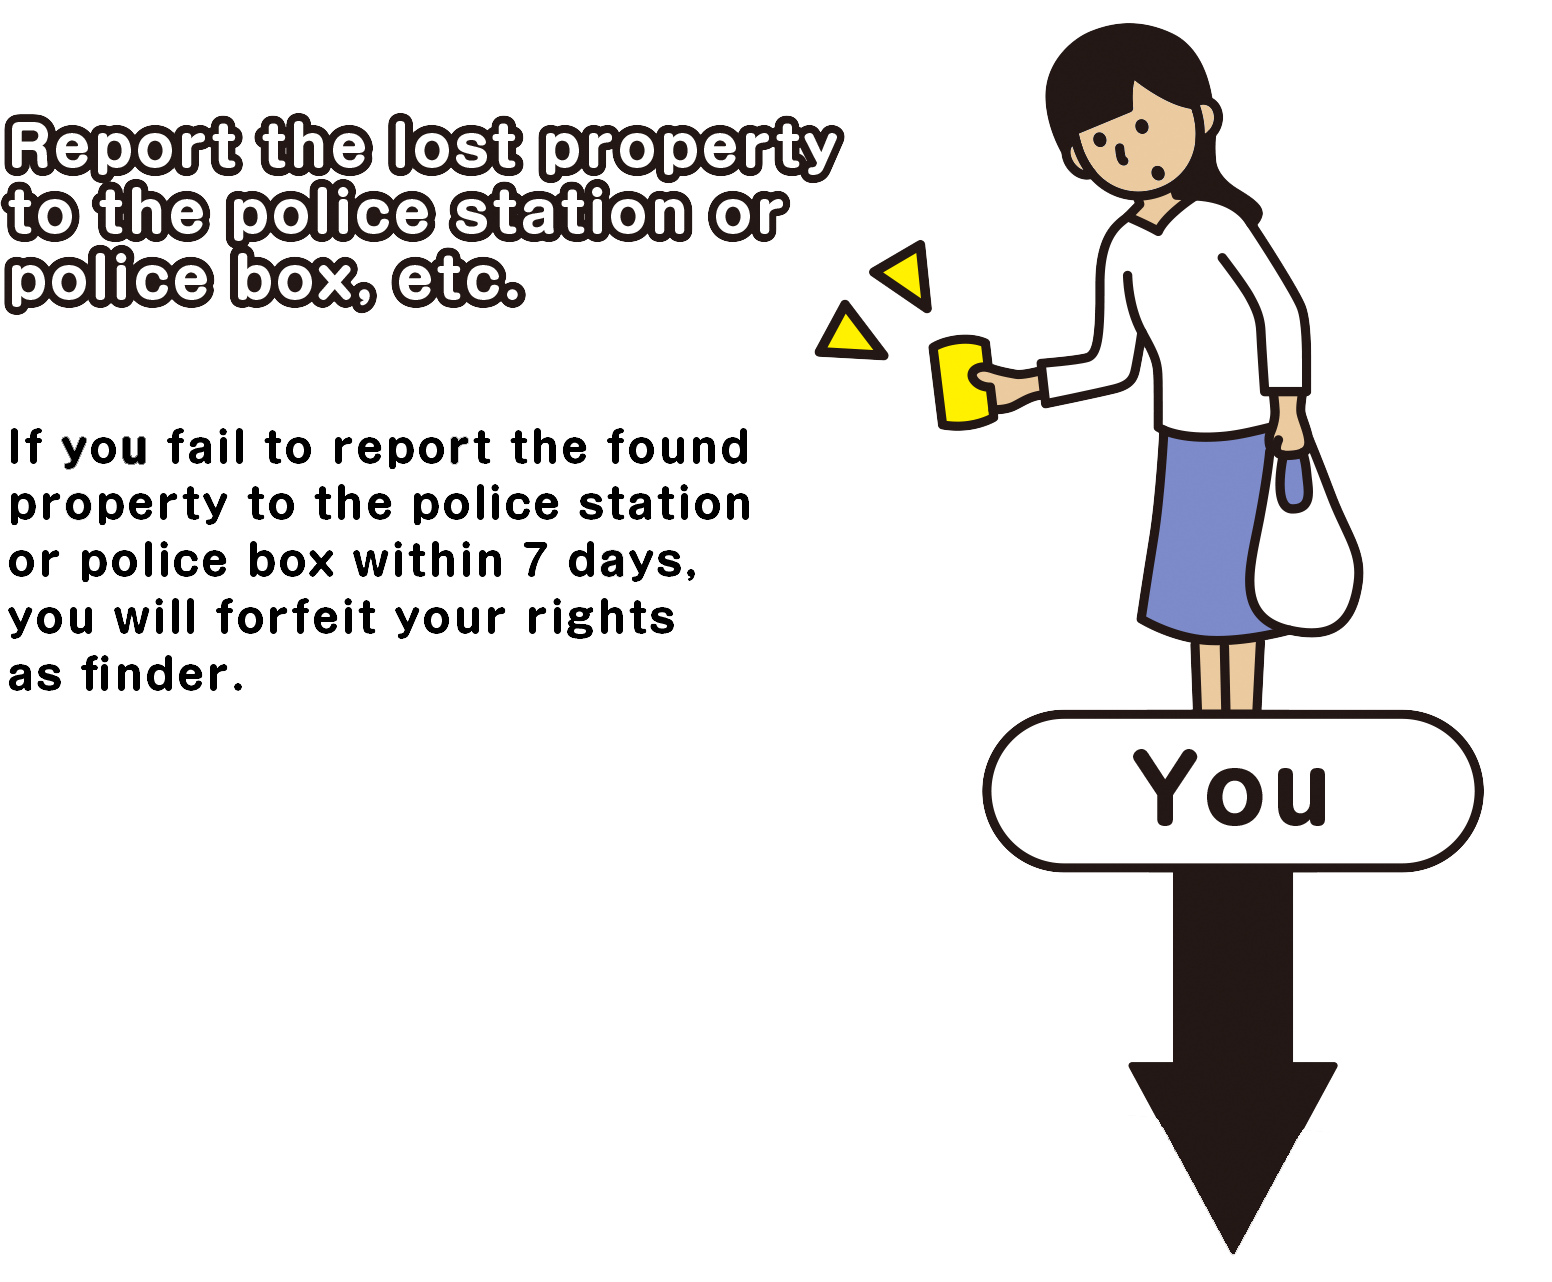 Report it to any police station or  police box. If you fail to report the found property to the police station or police box within 7 days, you will forfeit your rights as finder.